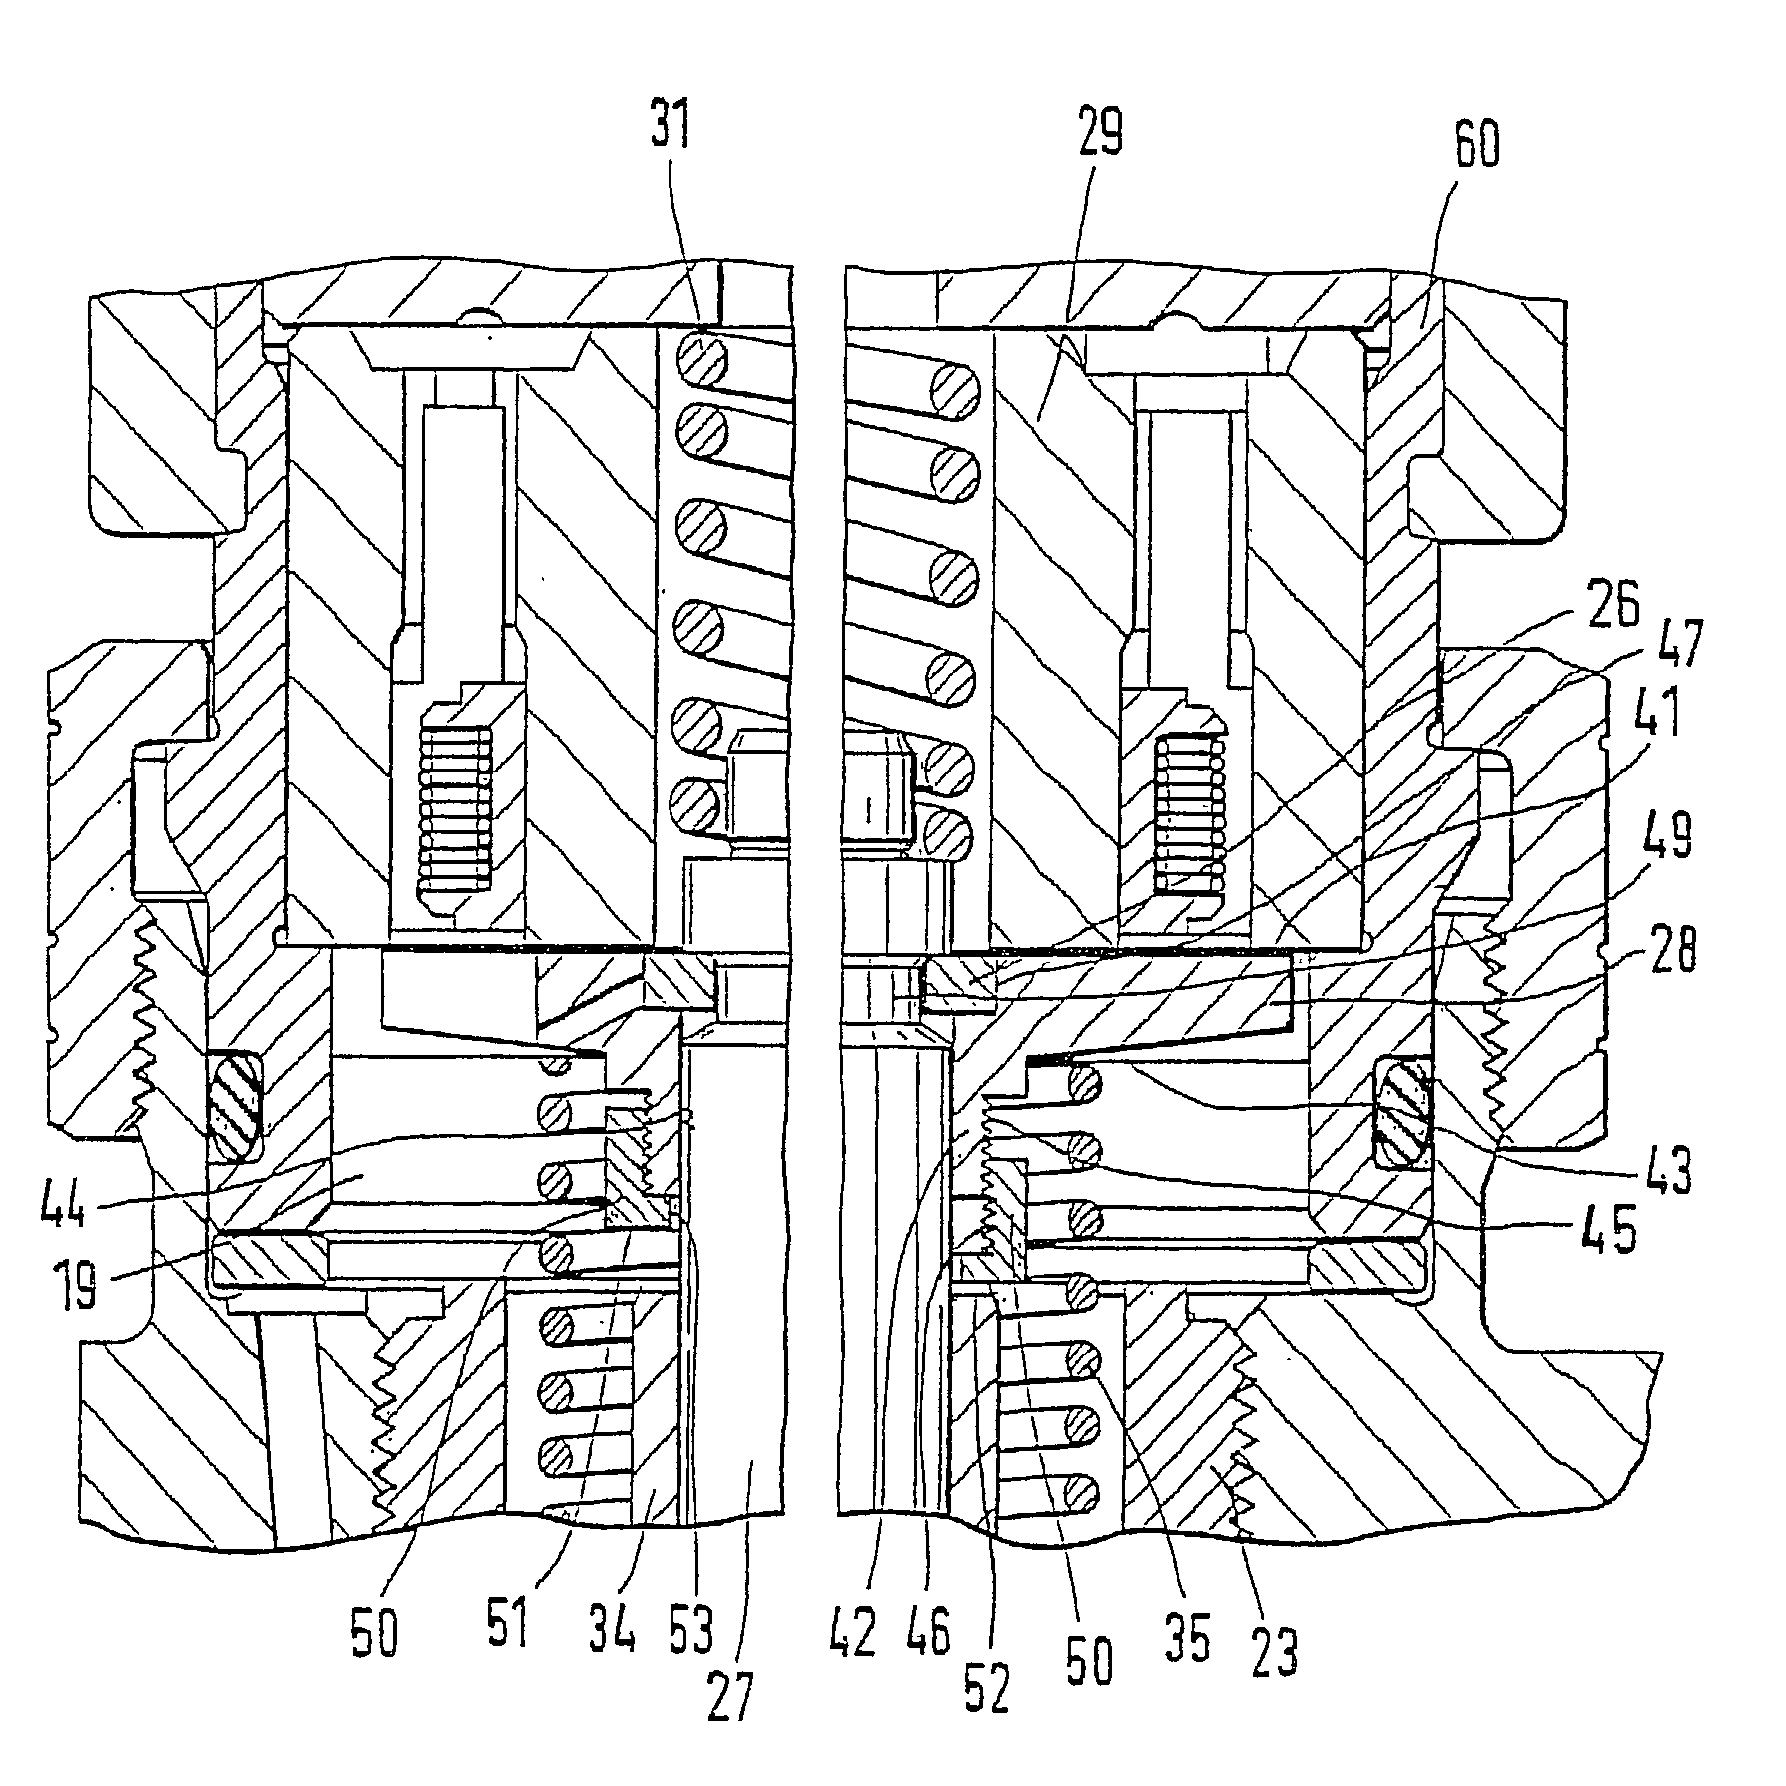 Electrovalve for controlling an injection valve in an internal combustion engine